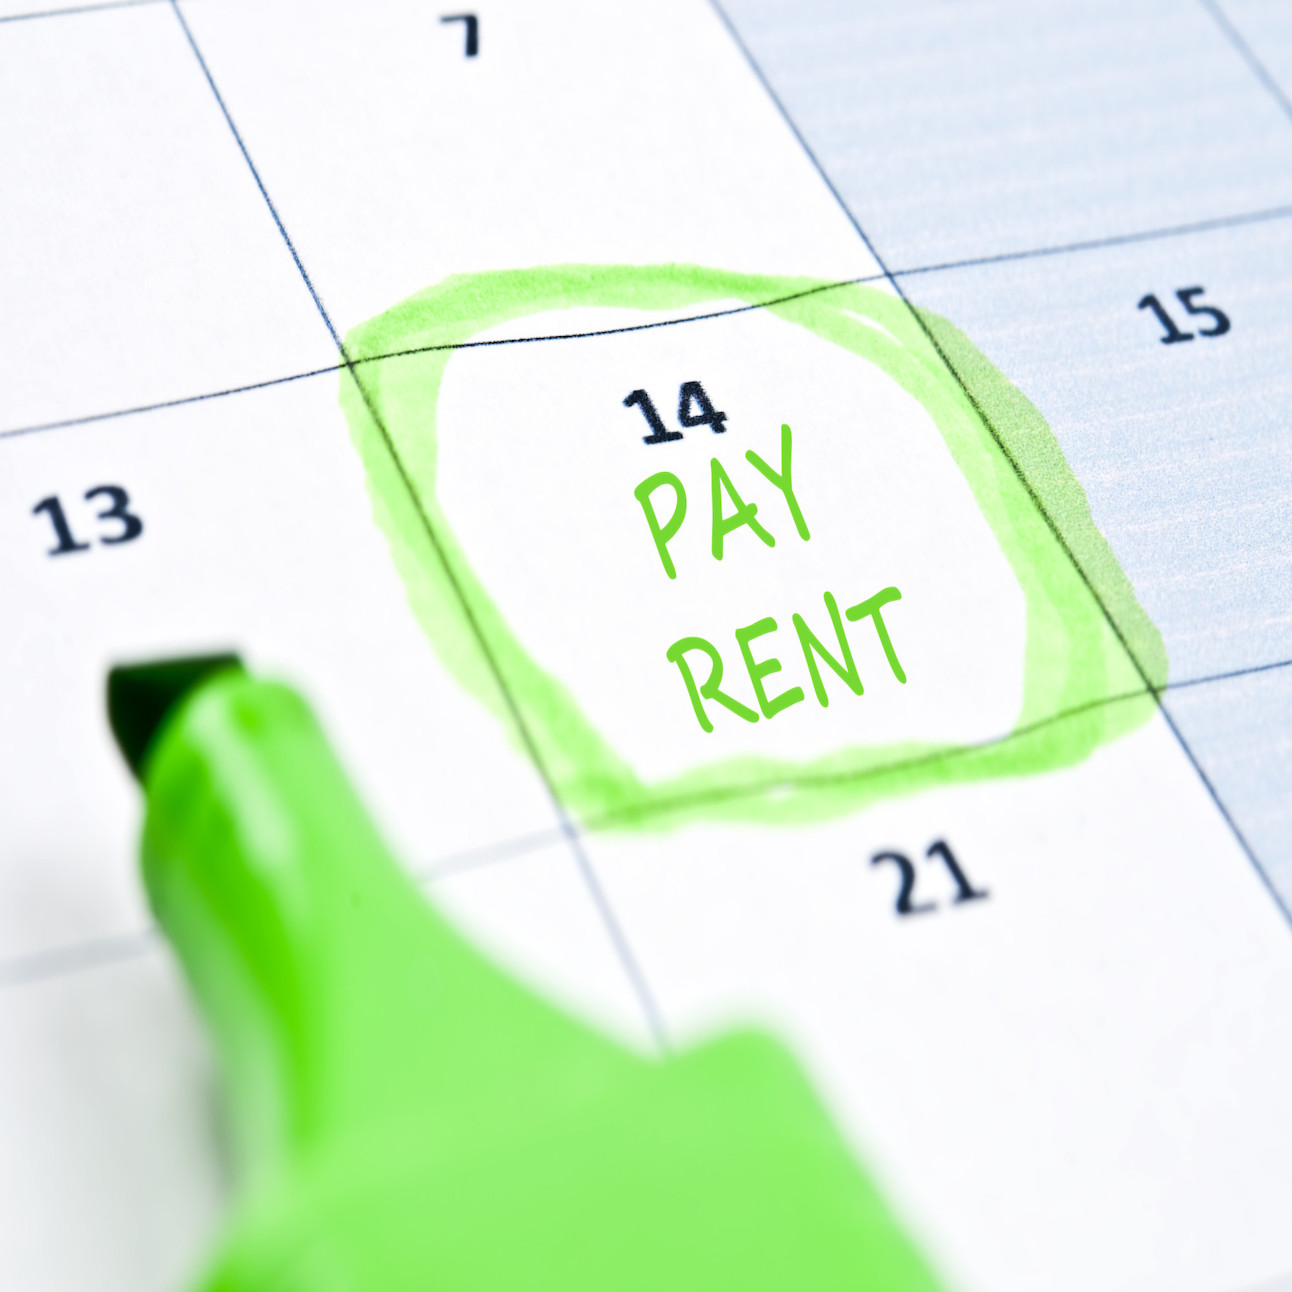 pay rent